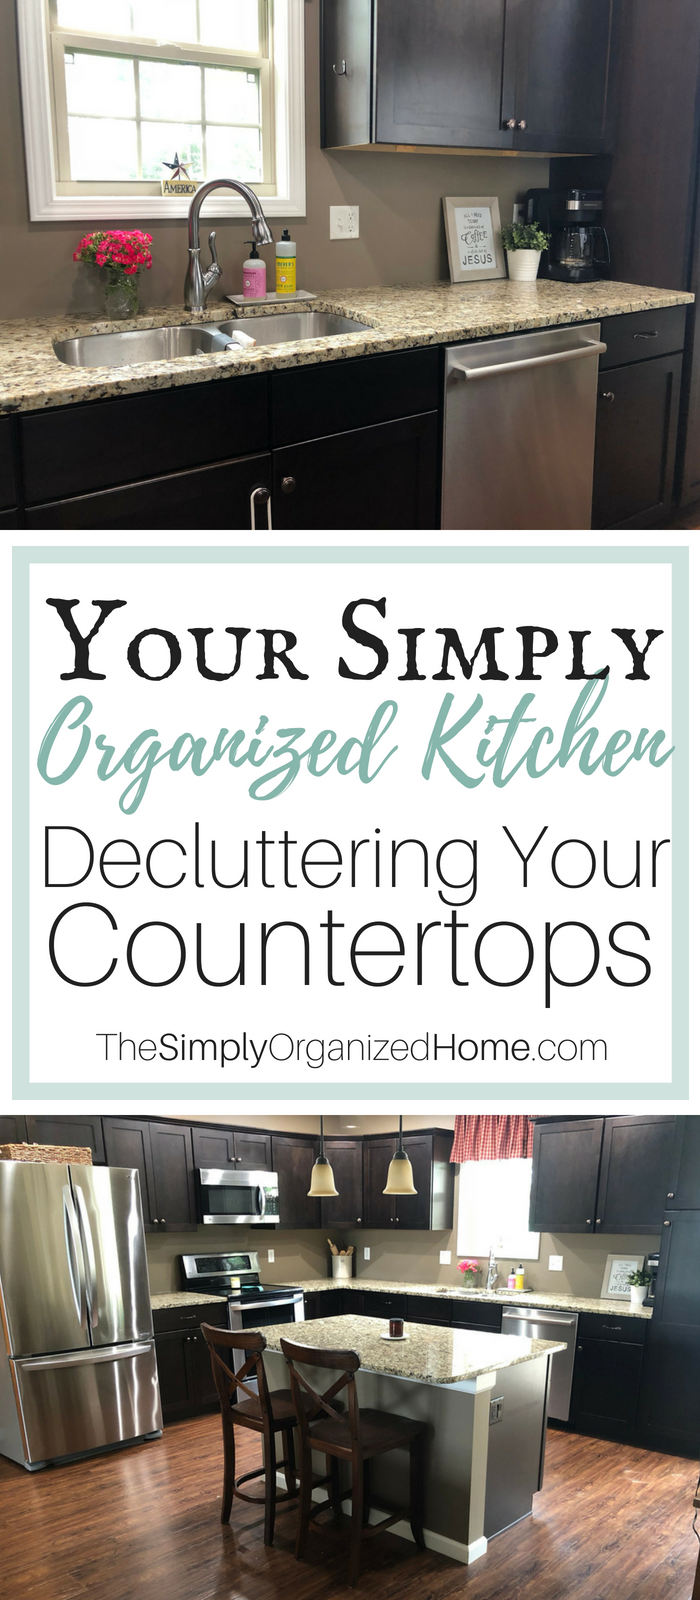 How to Maintain Clutter-Free Countertops